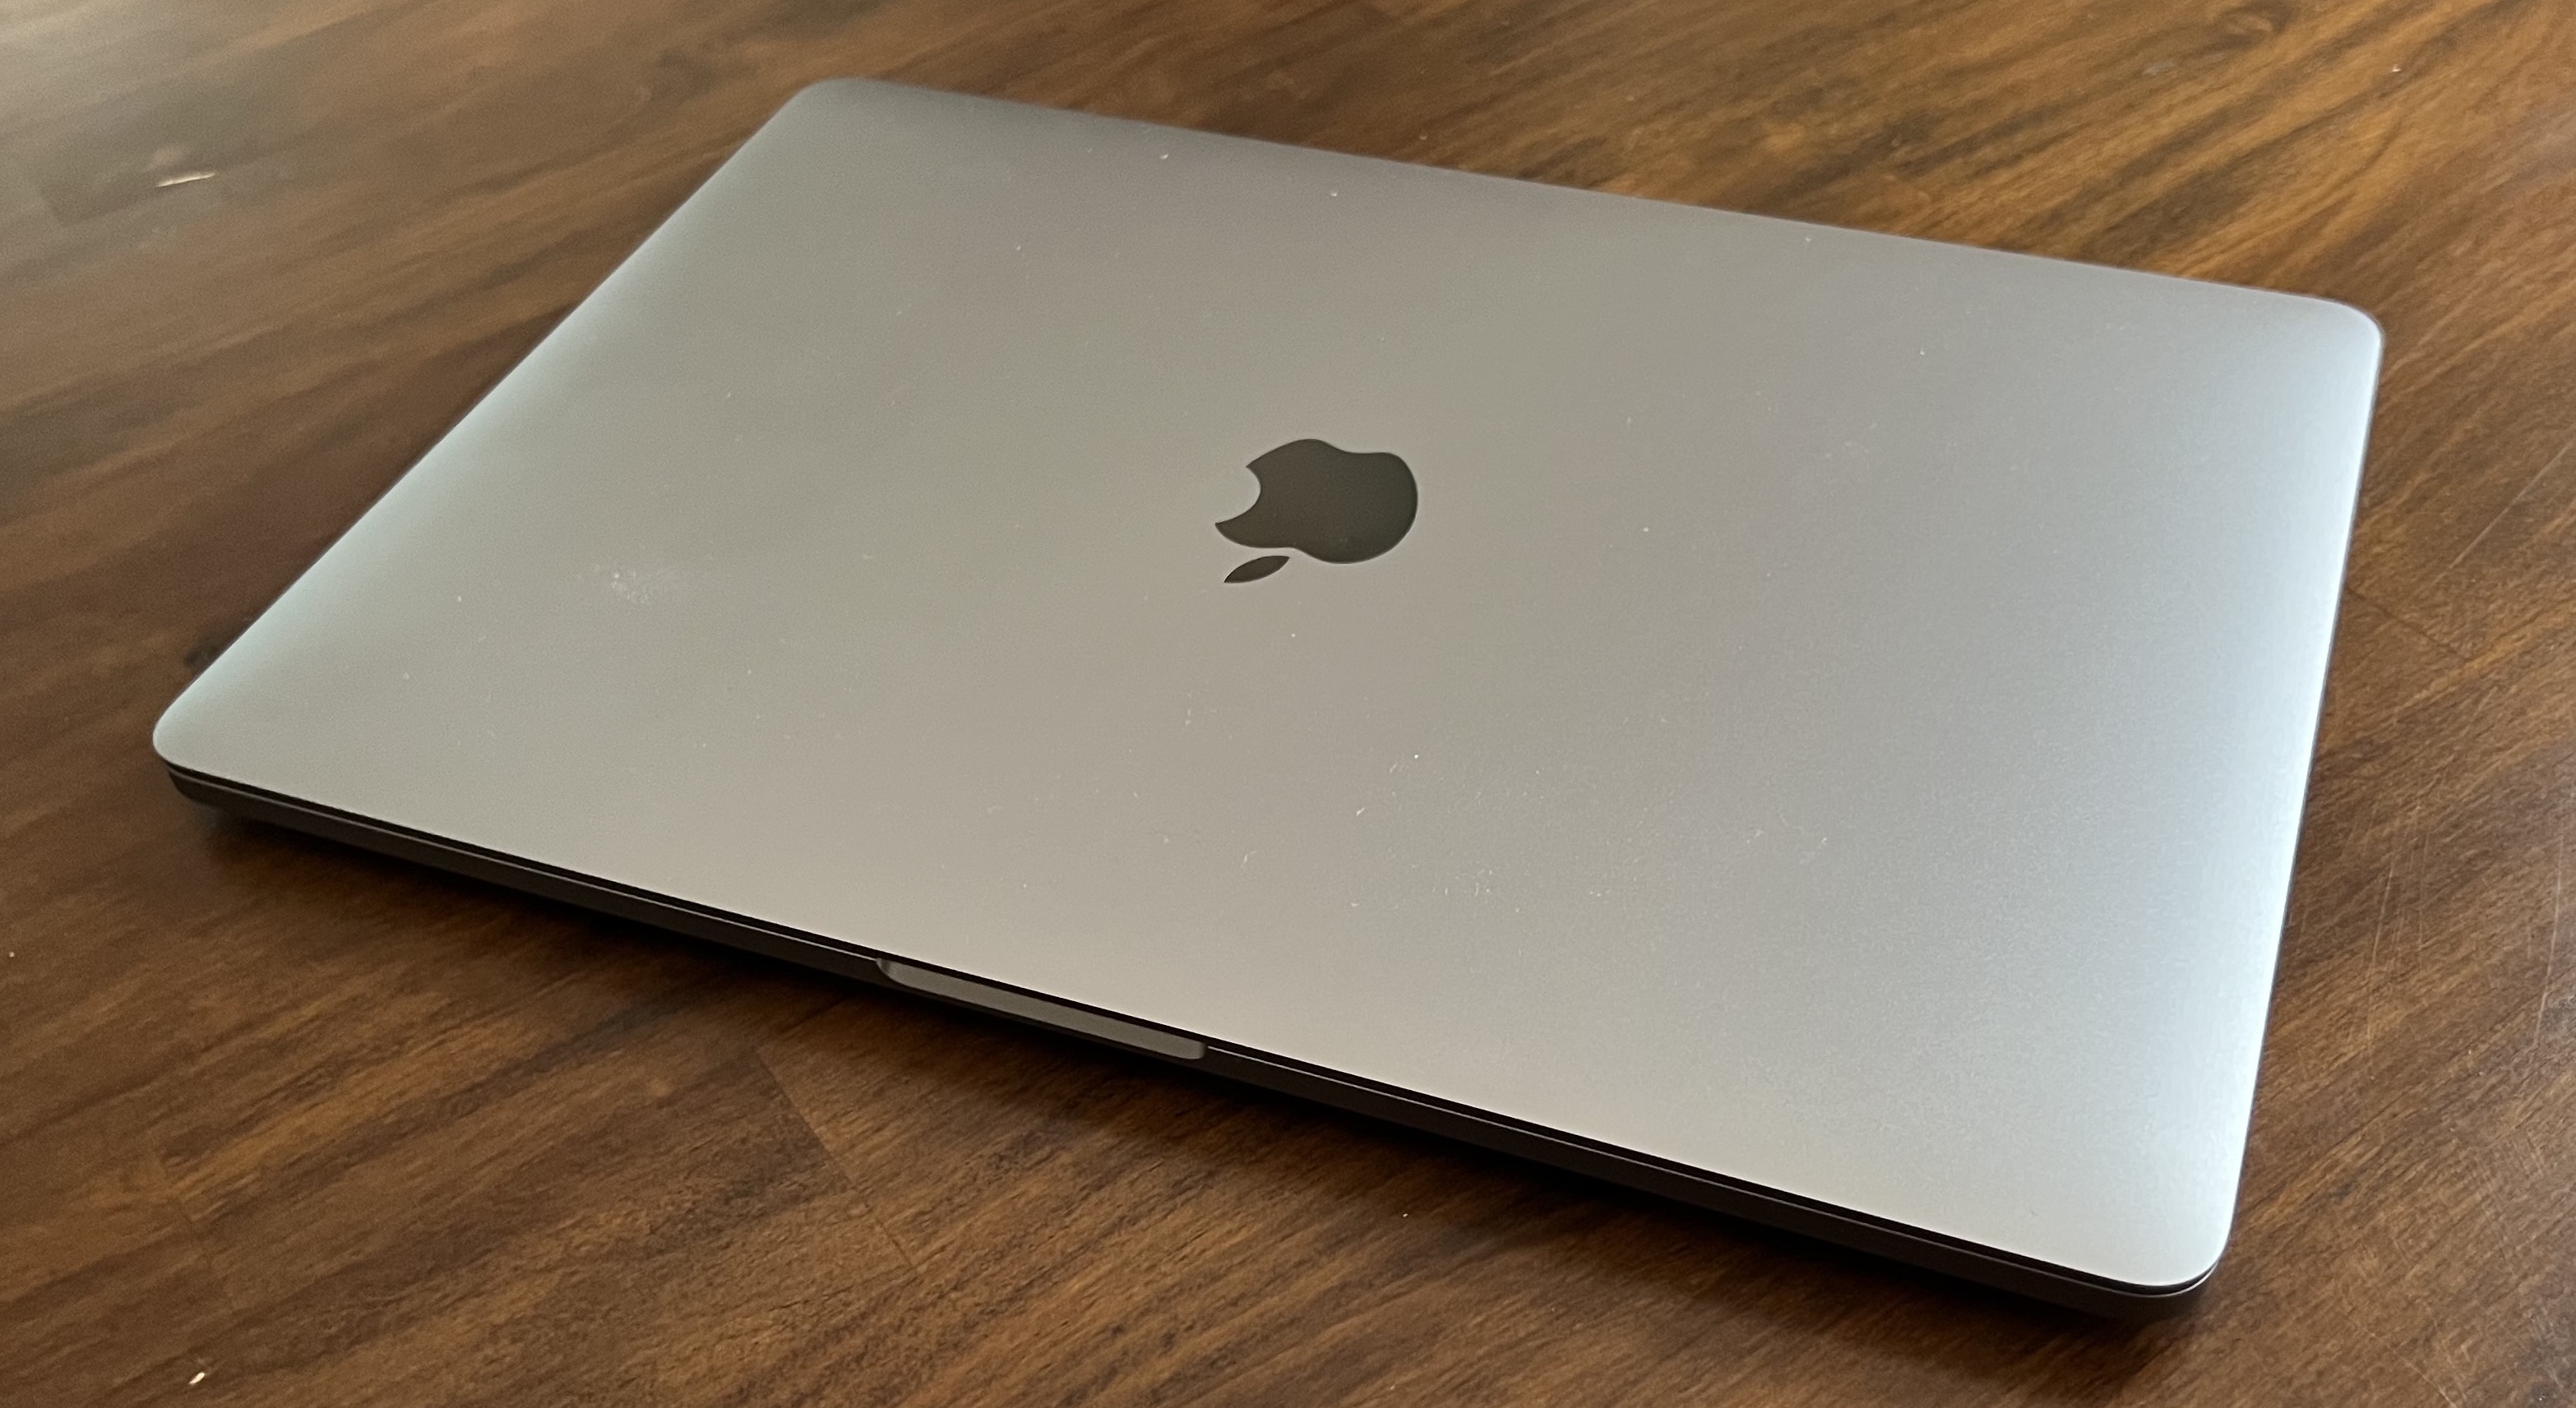 Damp preposition Incite M2 MacBook Pro's 256GB SSD is only about half as fast as the M1 version's |  Ars Technica